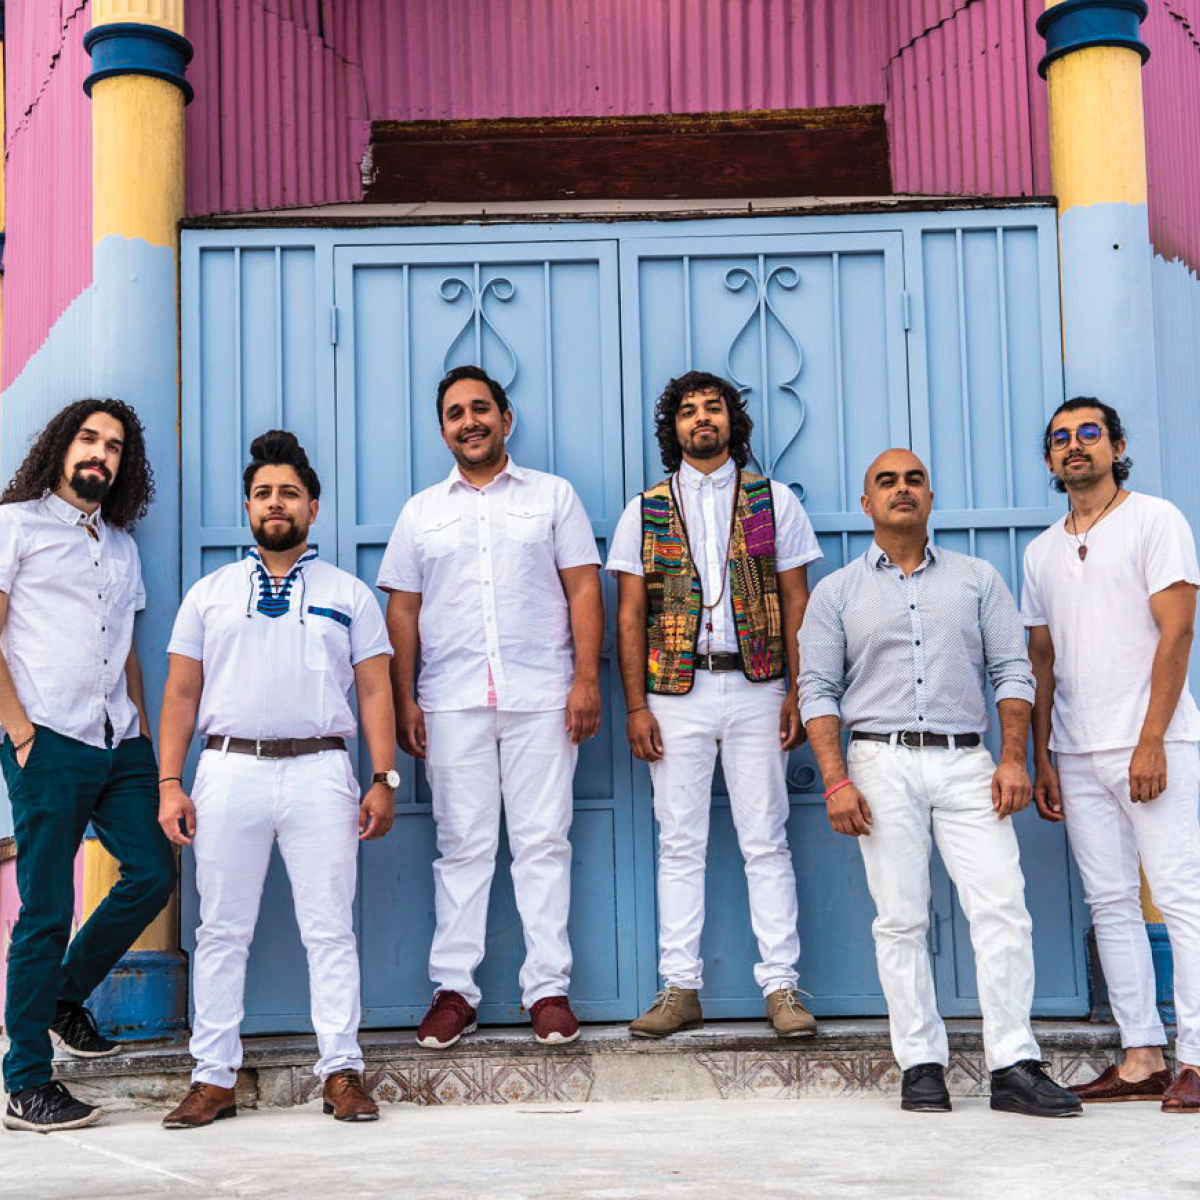 6 musicians in white clothes standing against a blue gate.